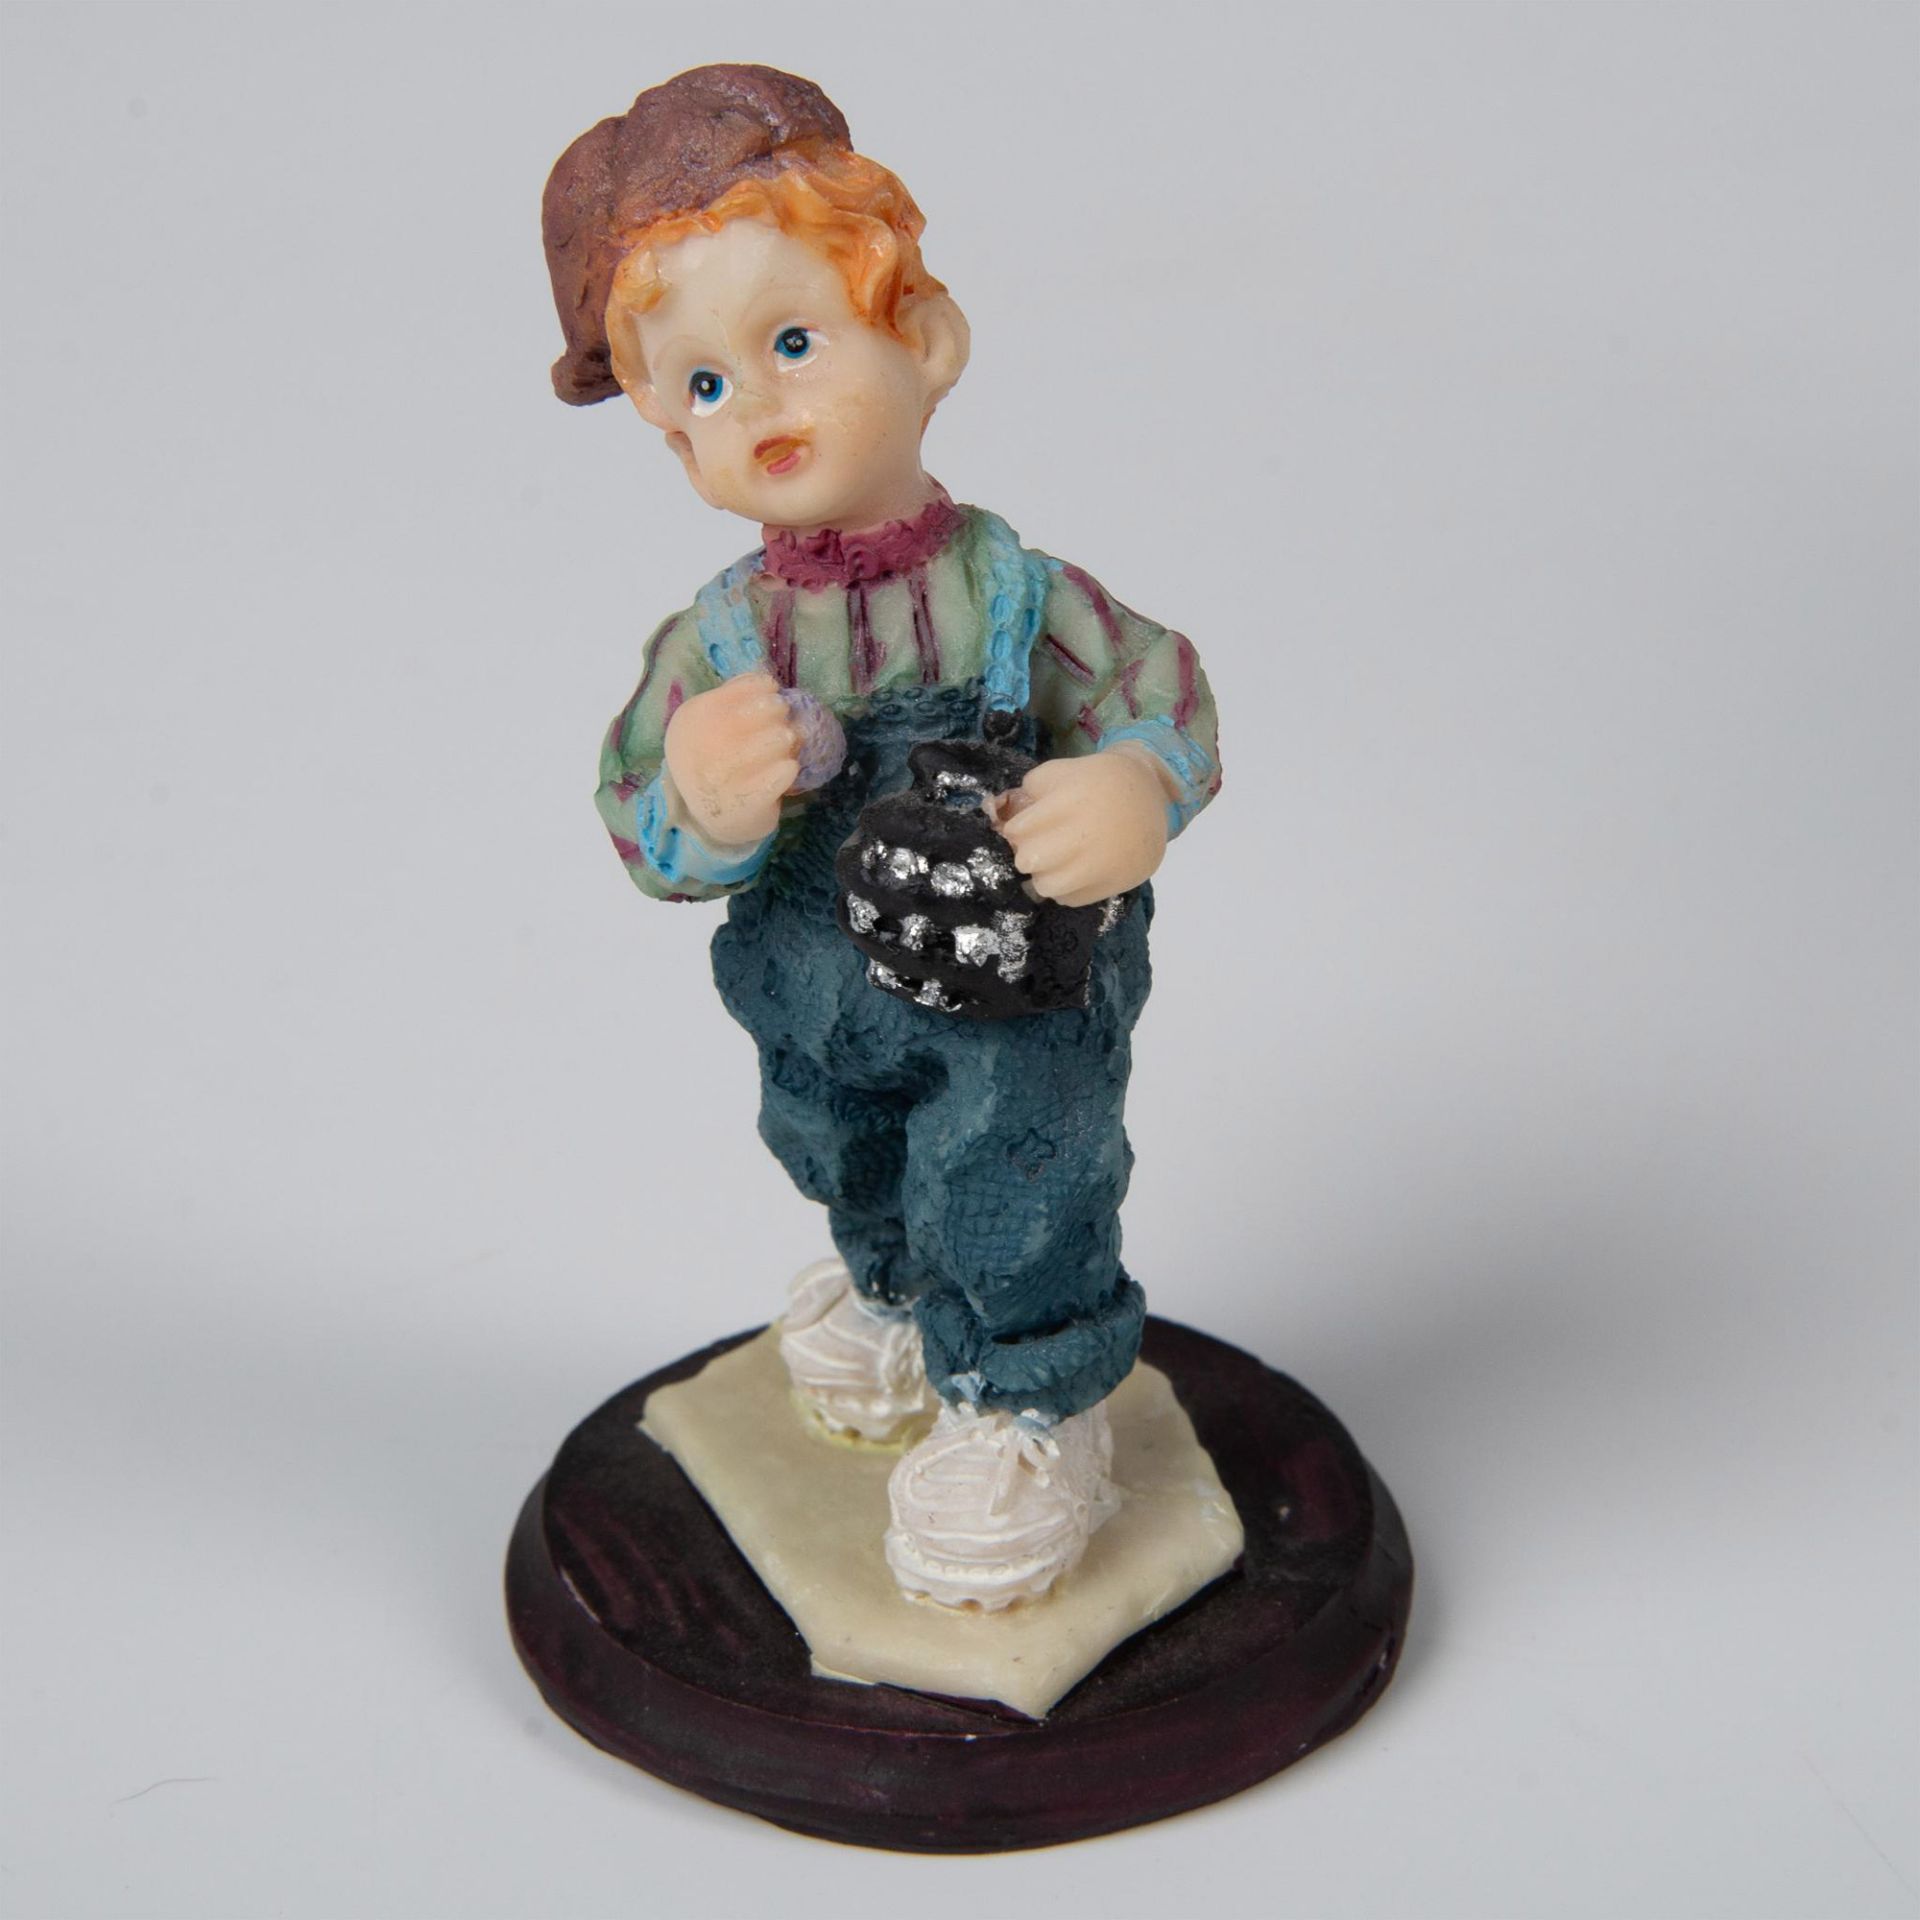 6pc Pharmacist Collectible Figurine Grouping - Image 3 of 14